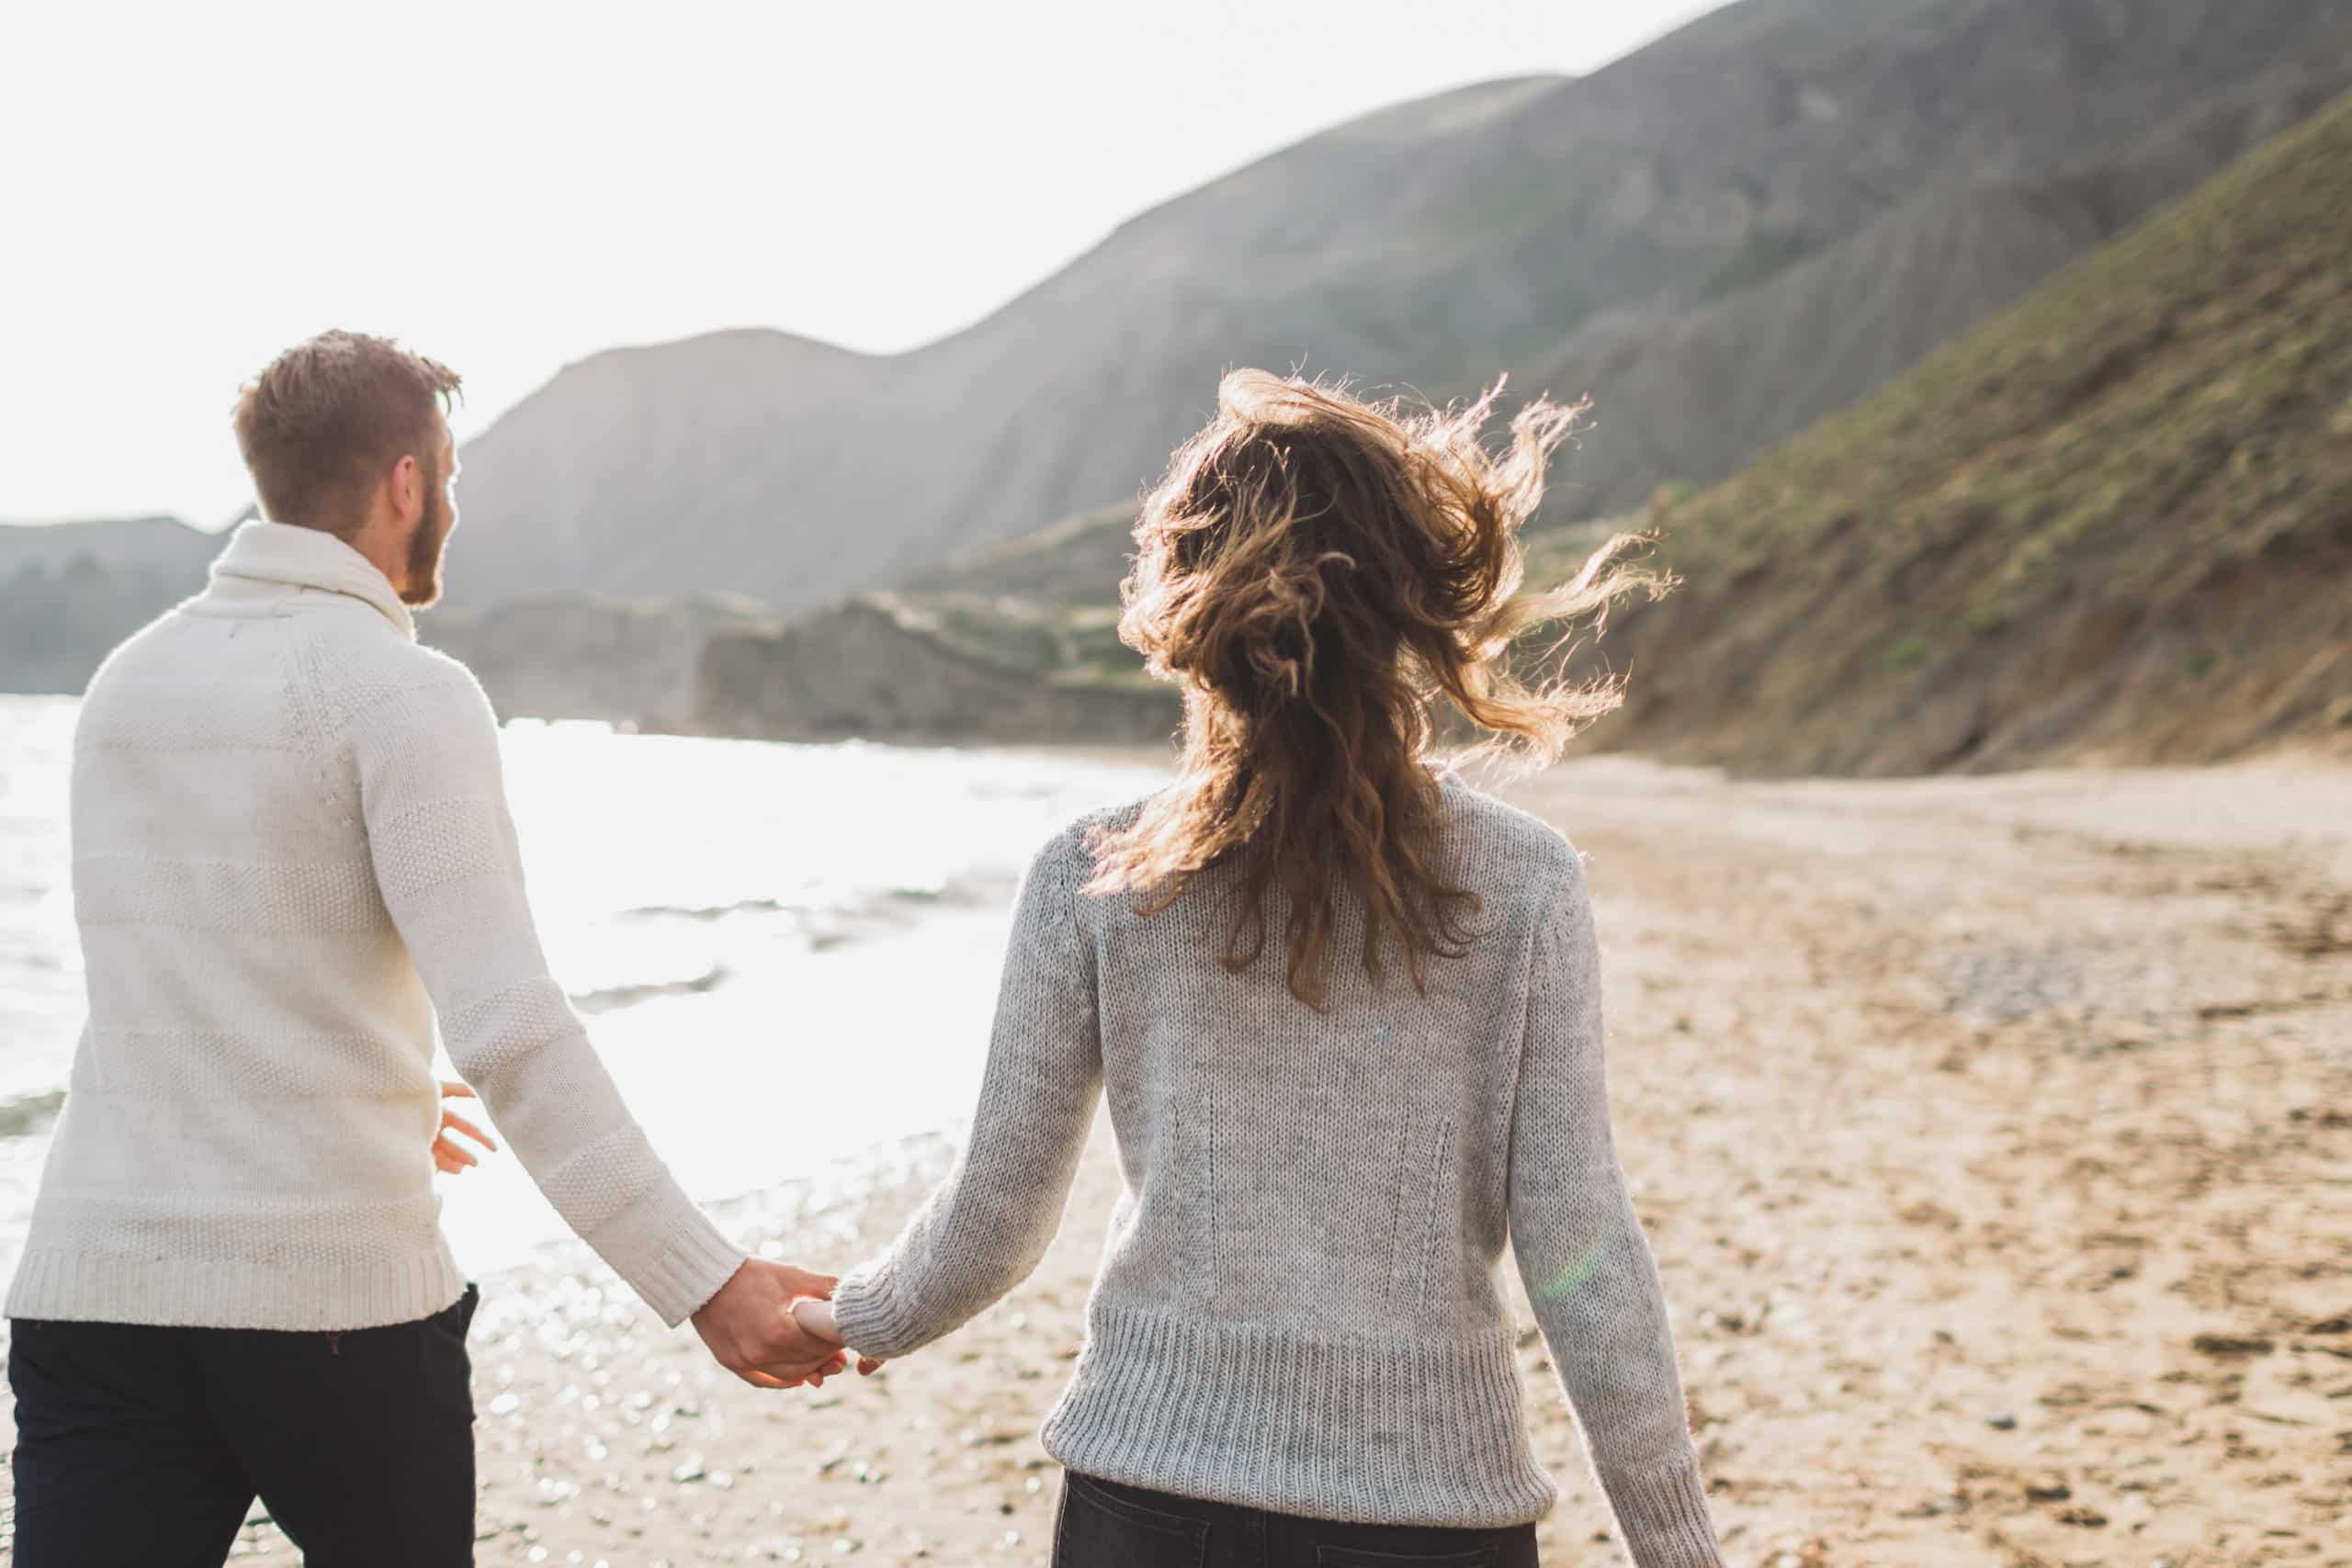 Man and woman in love holding hands as they walk on a breezy beach.